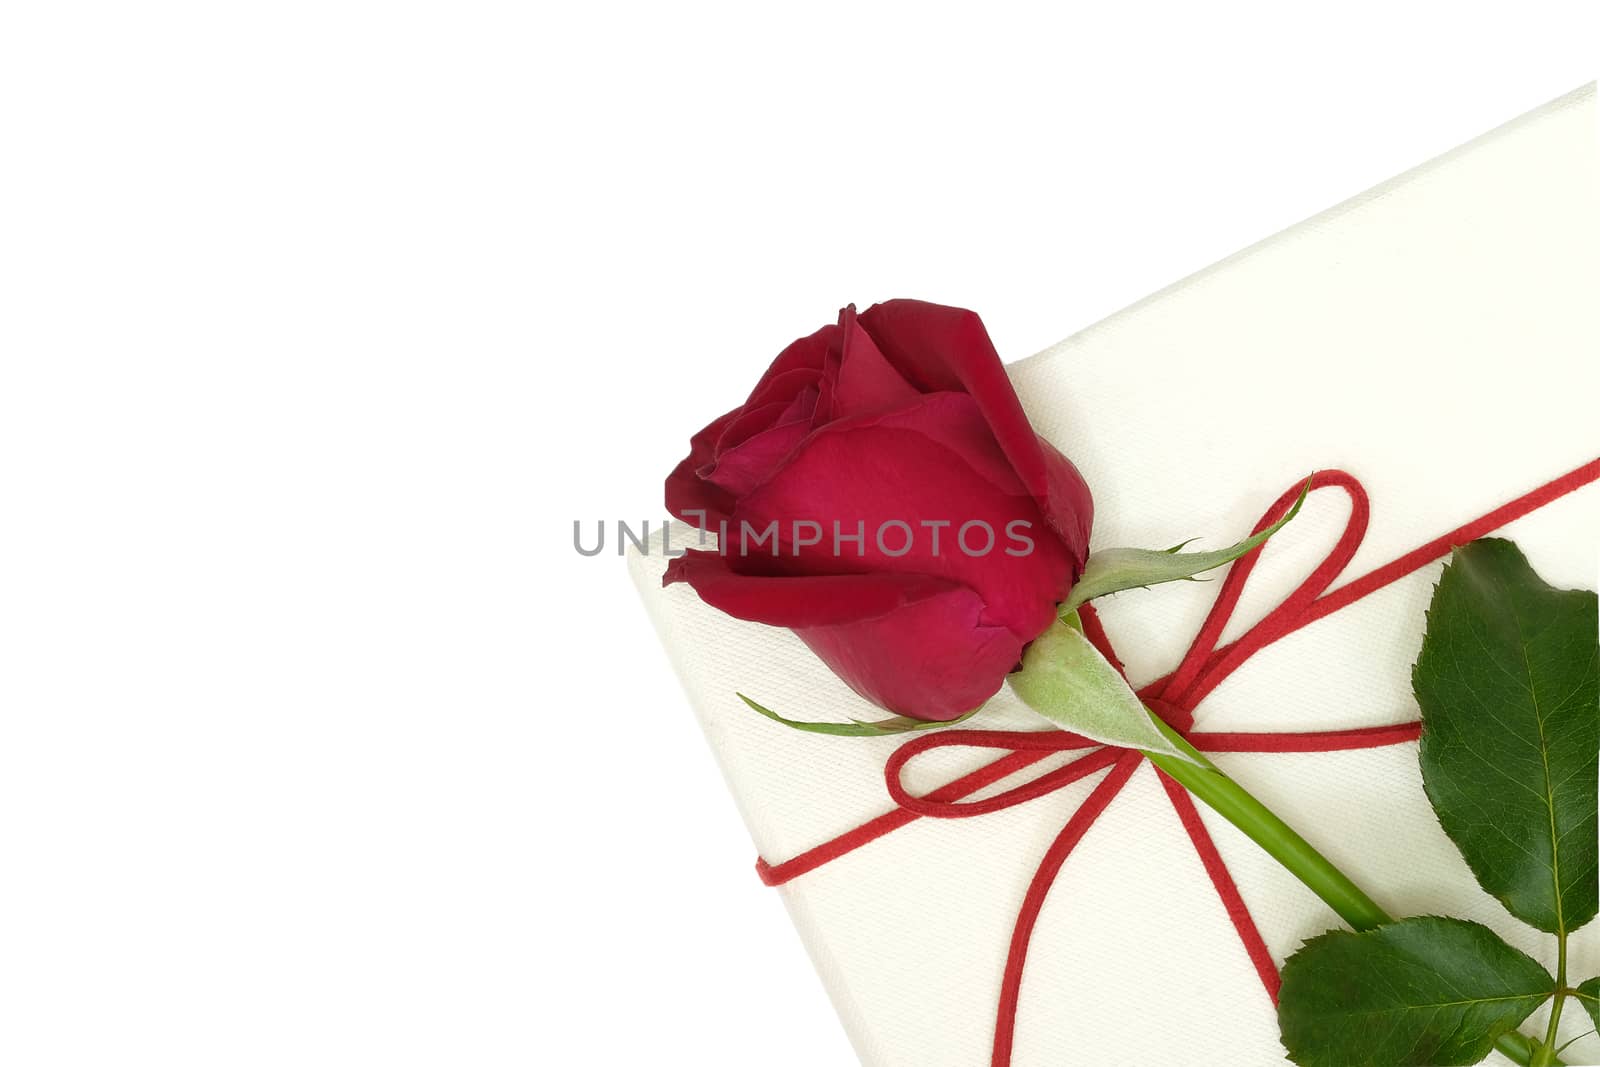 a beautiful red rose on a white paper box, isolated on white background